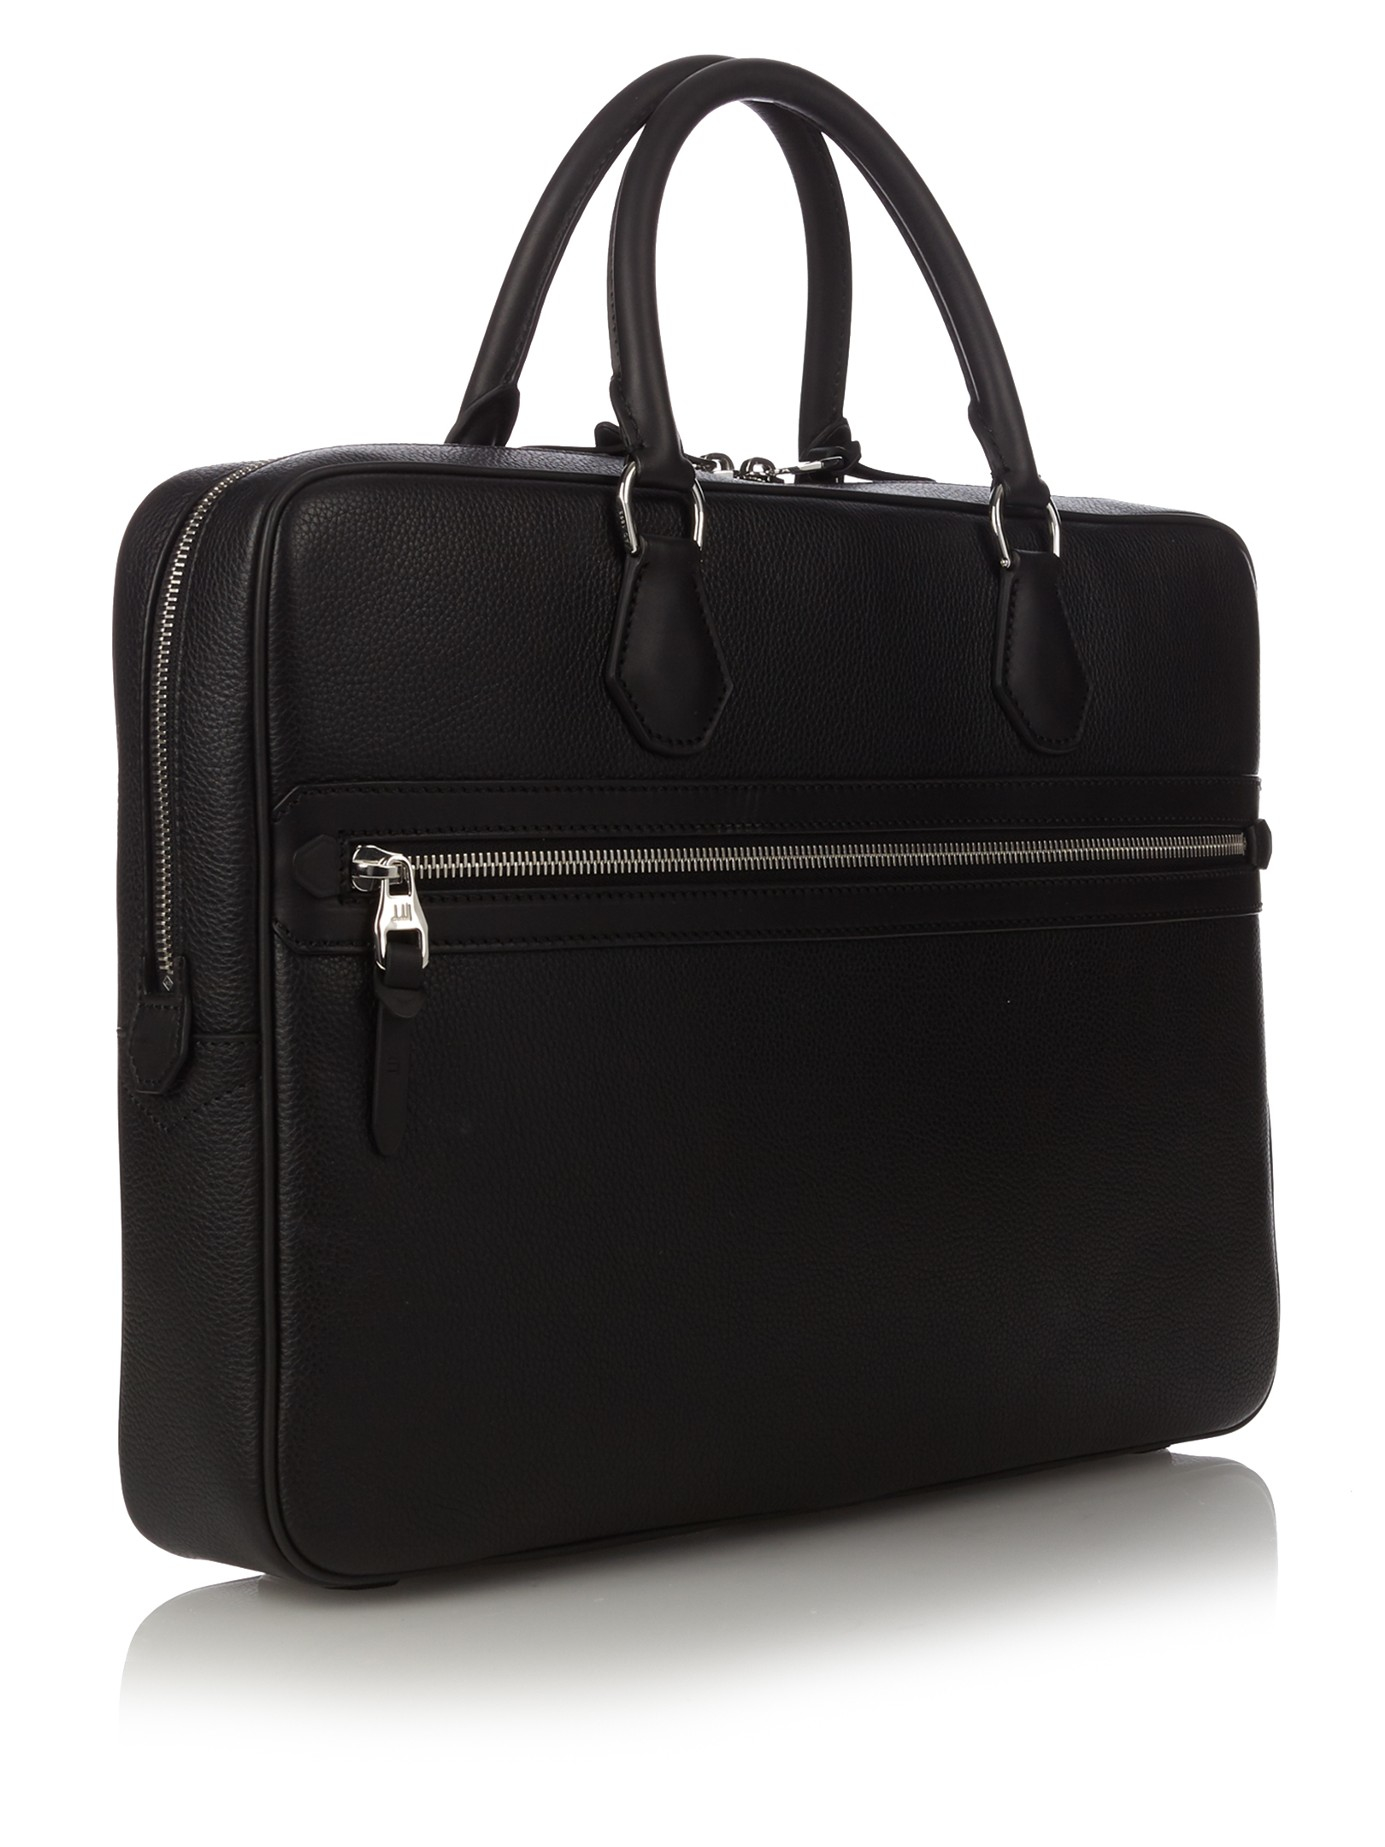 Lyst - Dunhill Boston Leather Briefcase in Black for Men